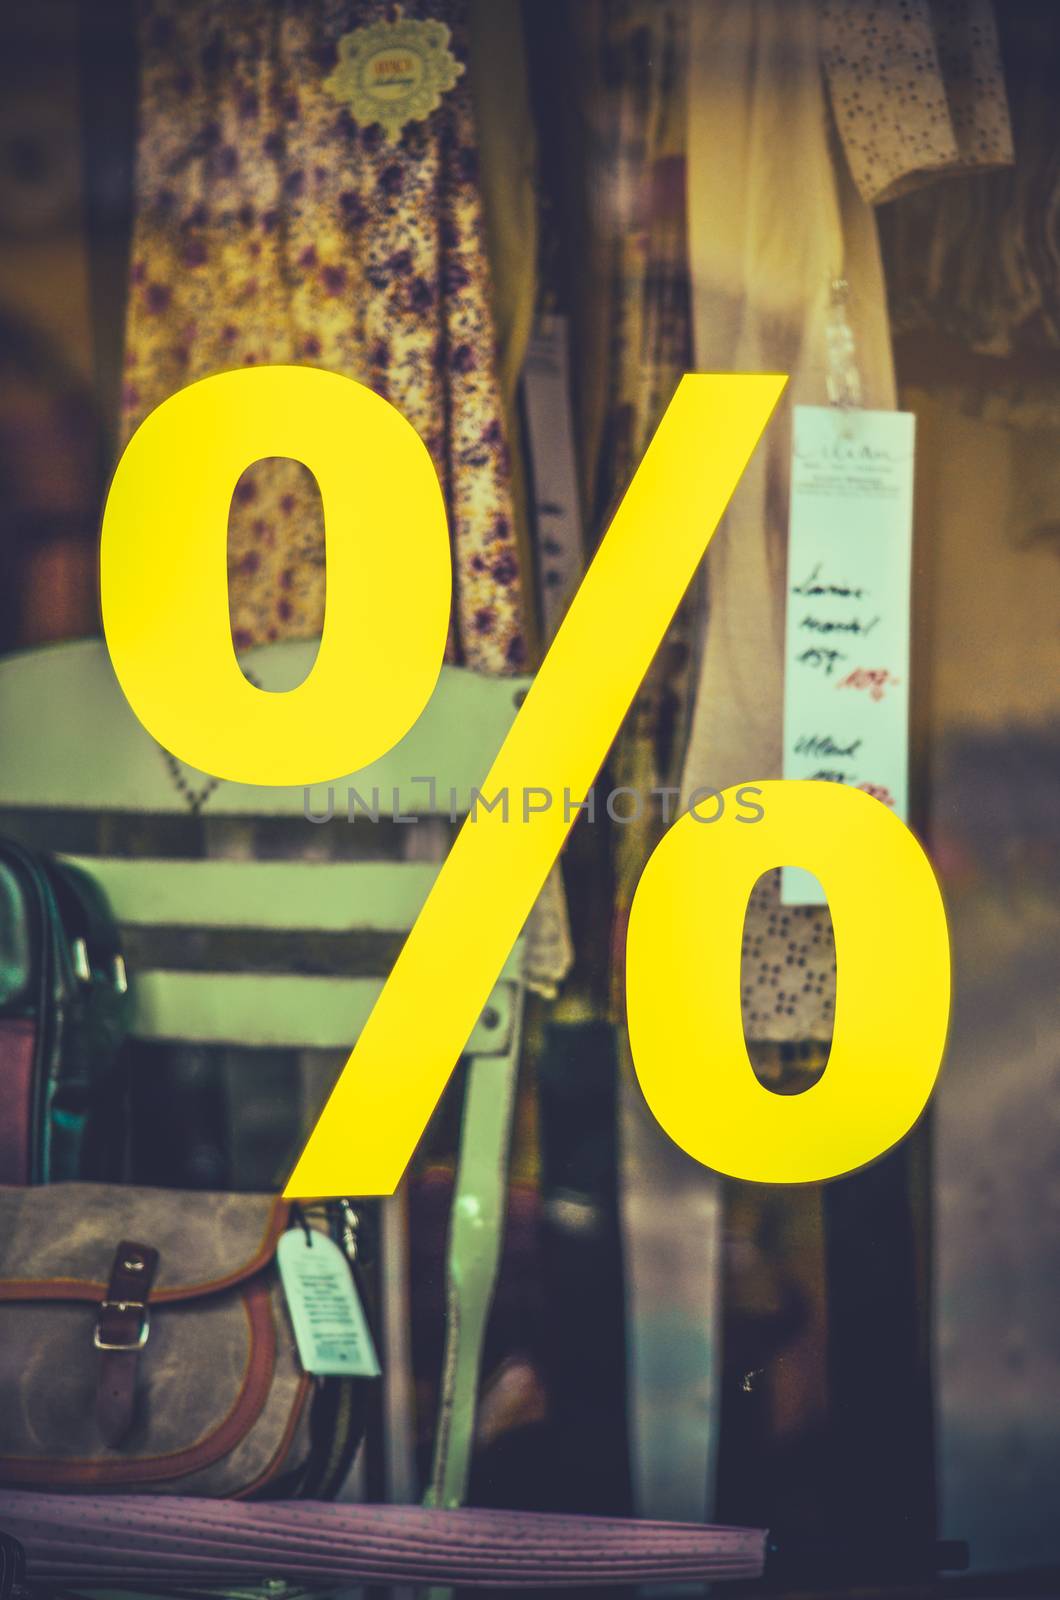 Retro Filtered Photo Of A Sale SIgn In A Vintage Clothing Store